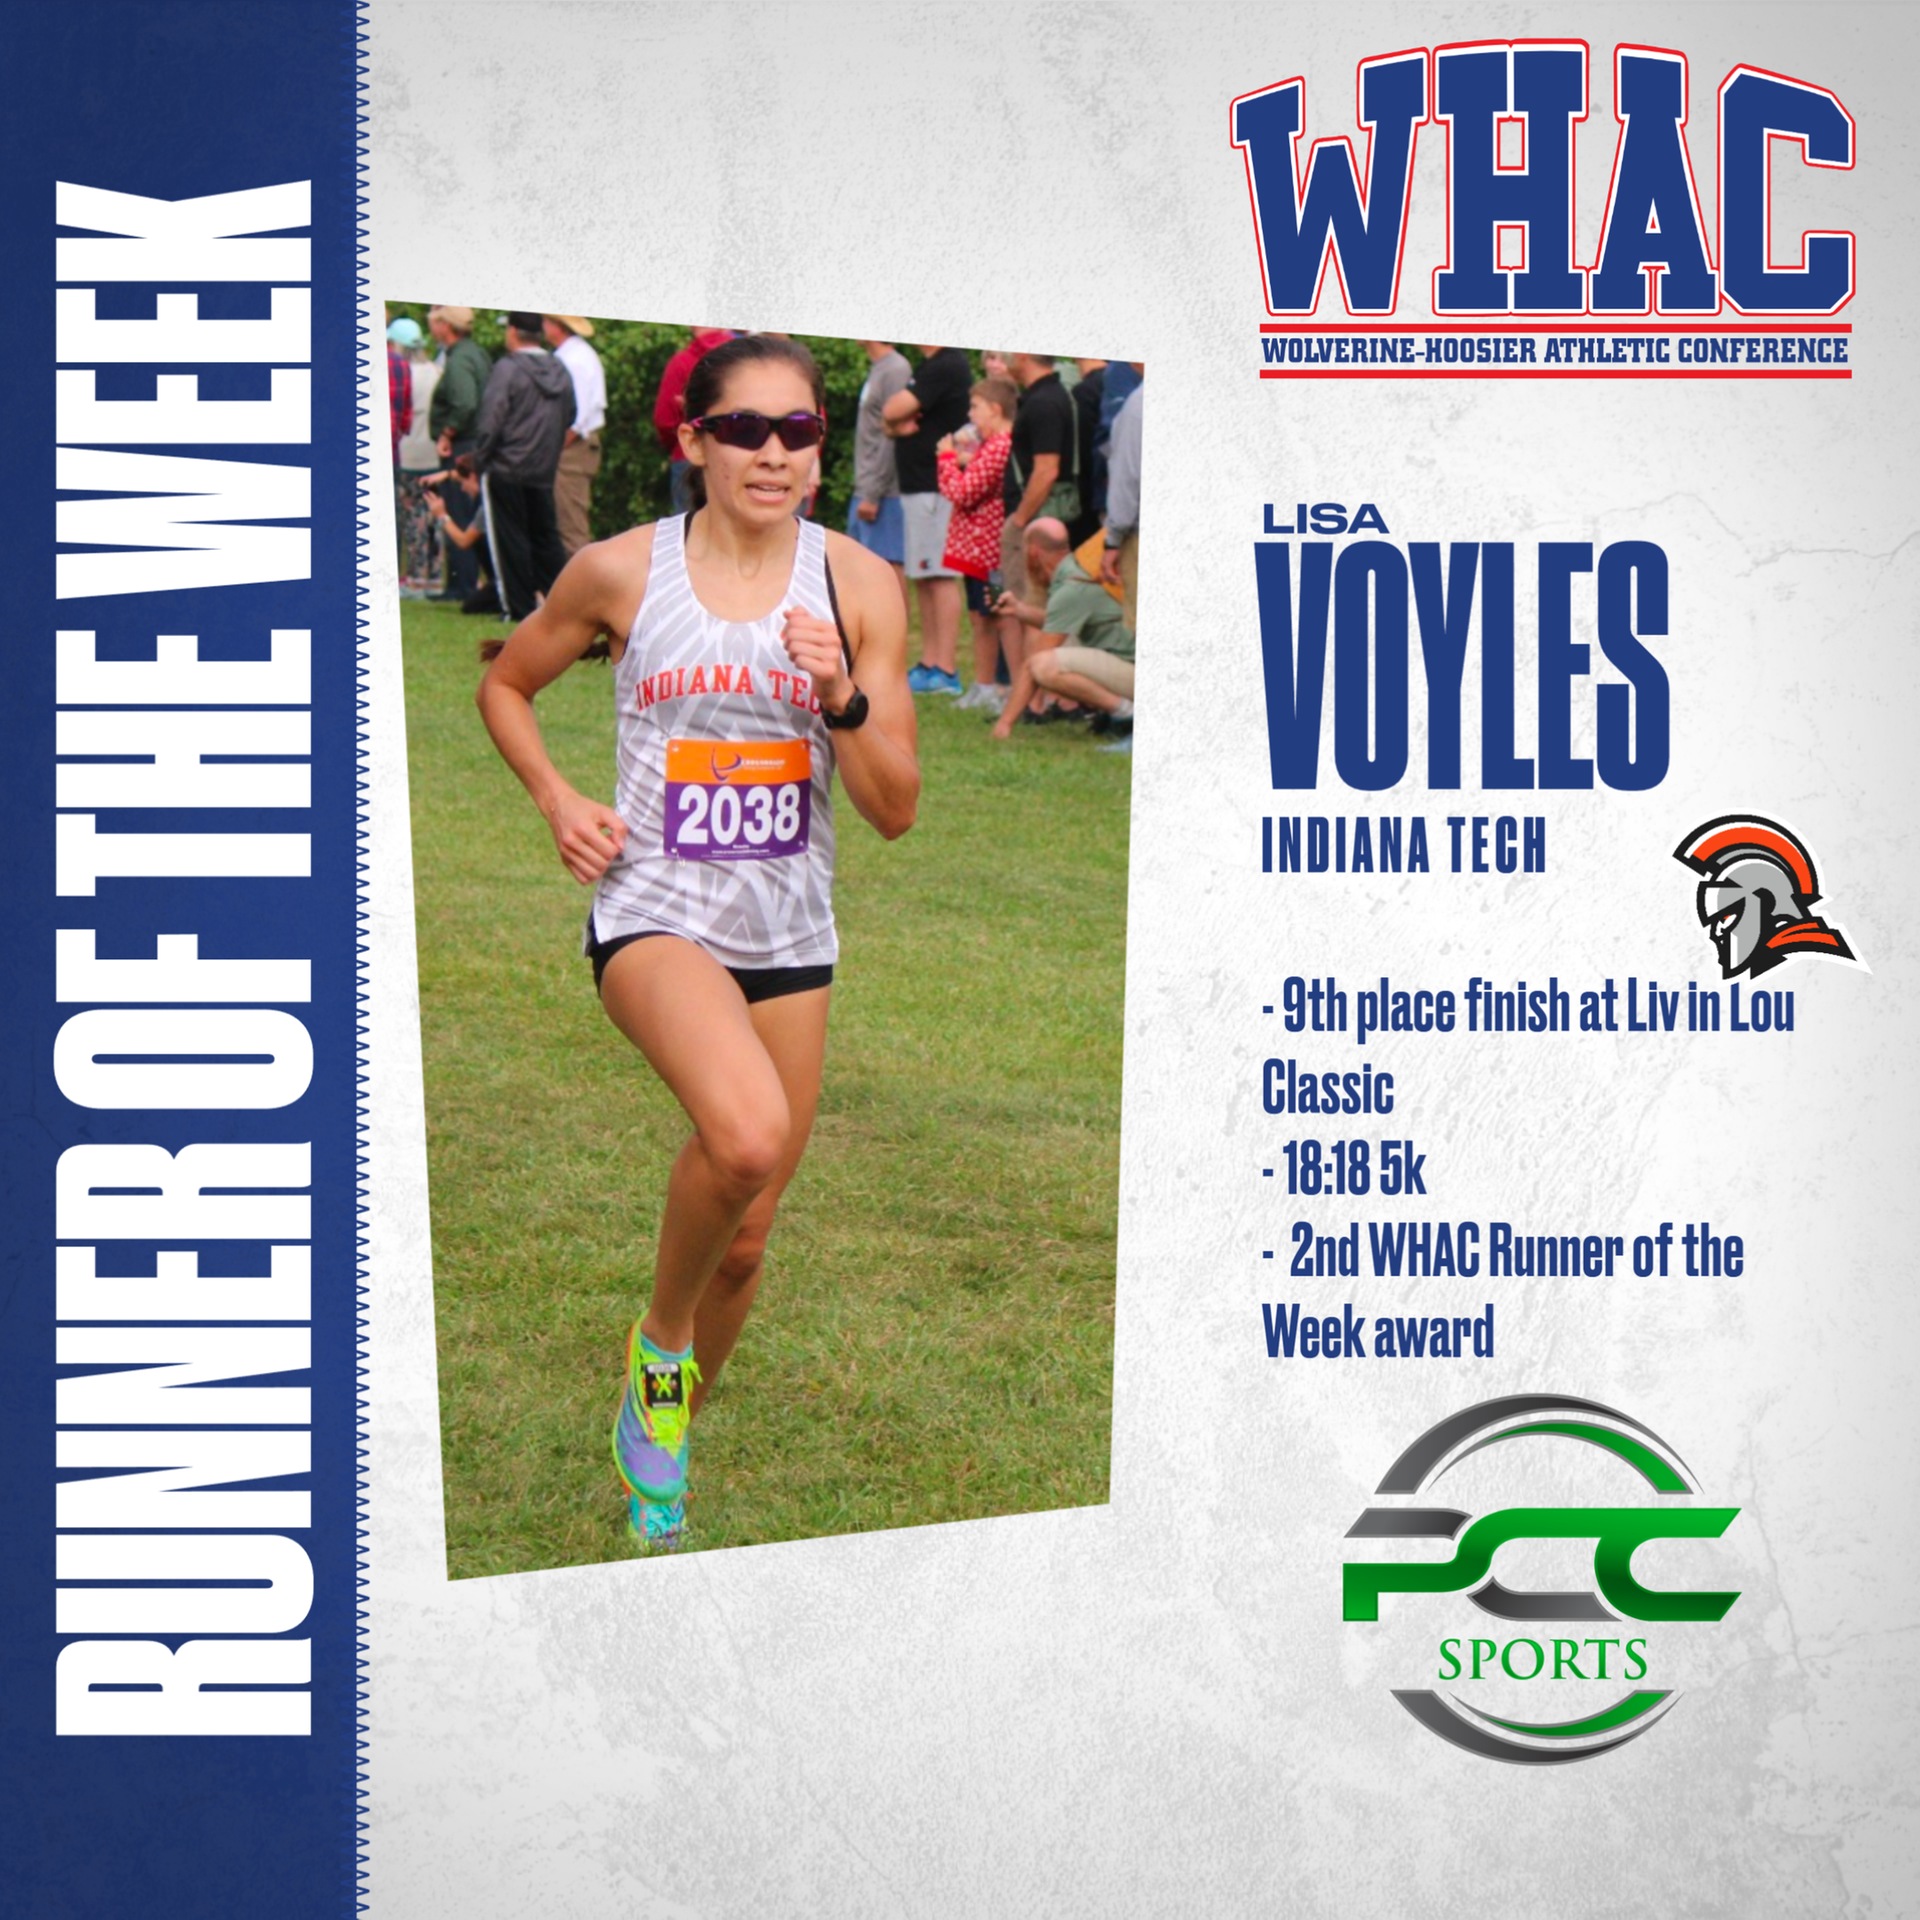 Indiana Tech's Voyles named WHAC Runner of the Week